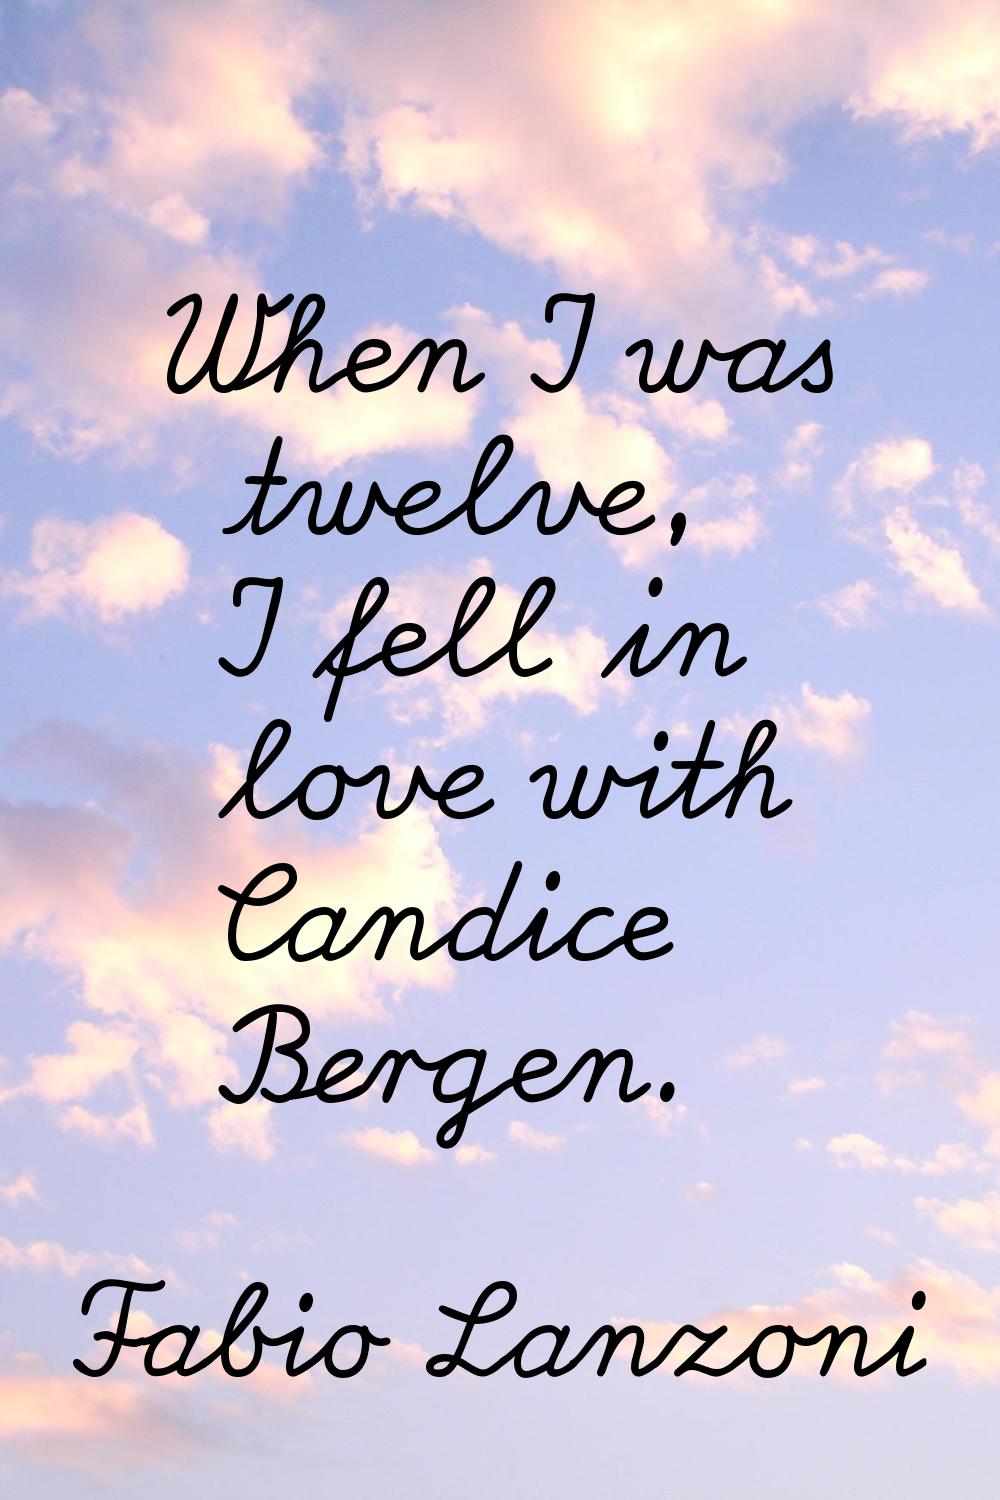 When I was twelve, I fell in love with Candice Bergen.